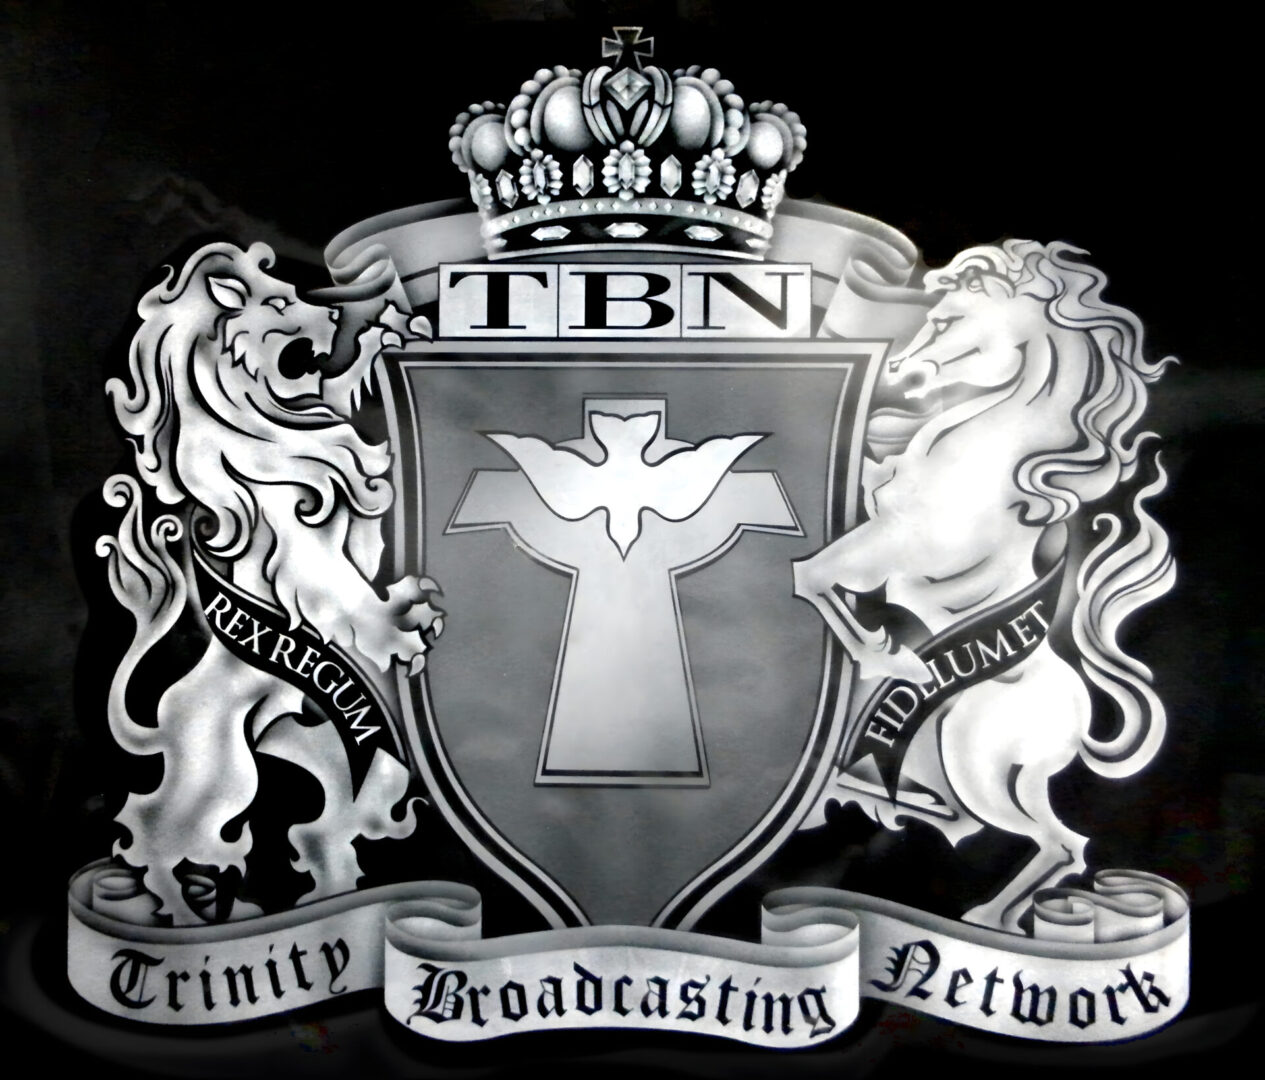 A black and white logo of the trinity broadcasting network featuring a shield with a cross, flanked by two lions, and a crown above.